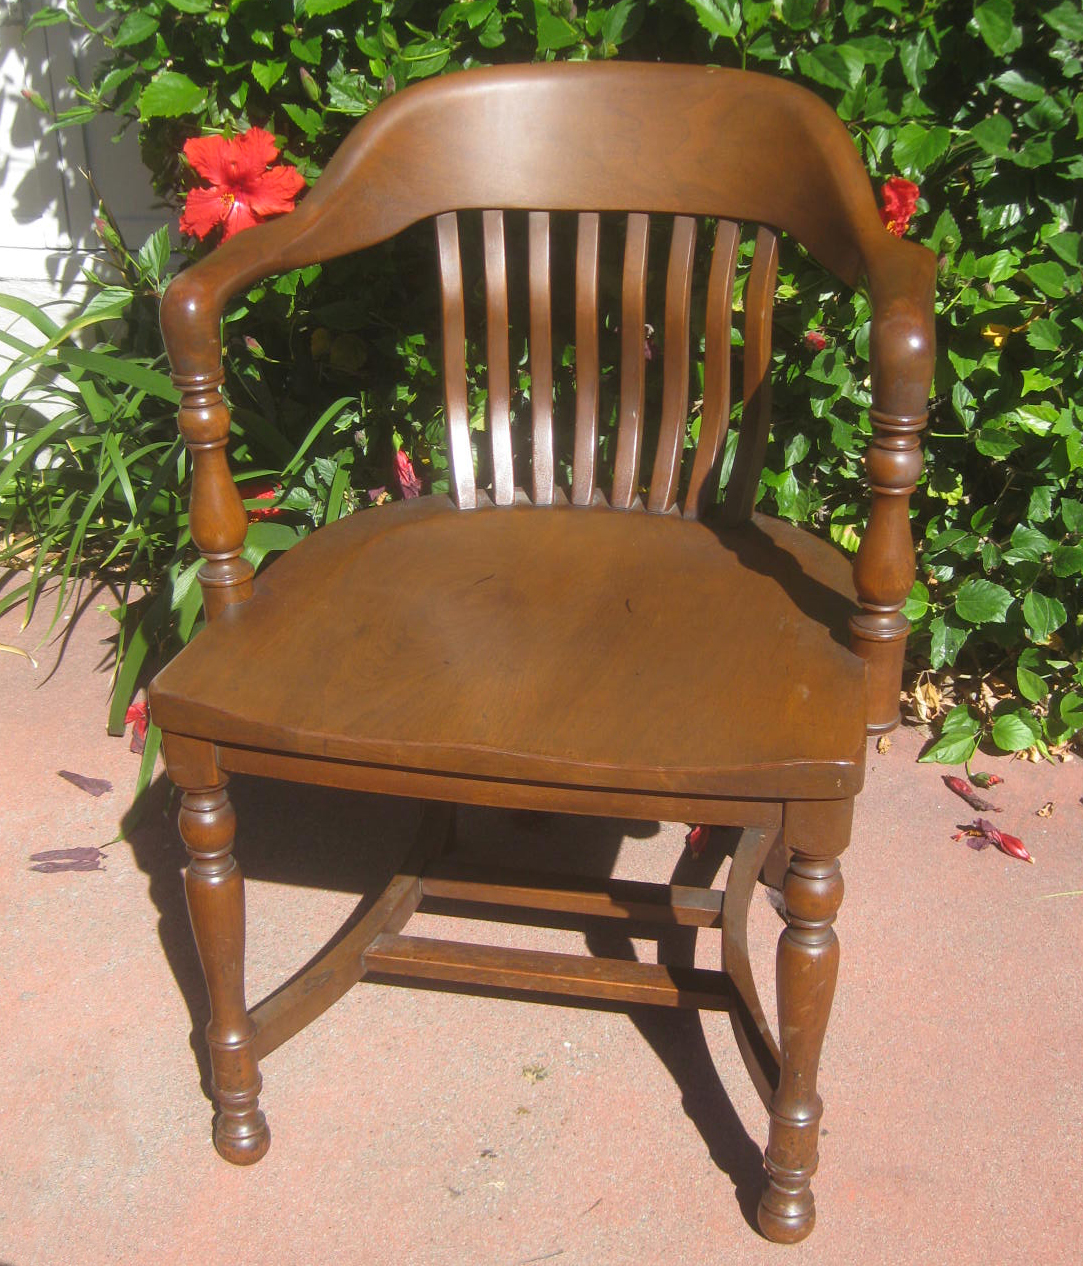 UHURU FURNITURE & COLLECTIBLES: SOLD - Banker's Chair - $50